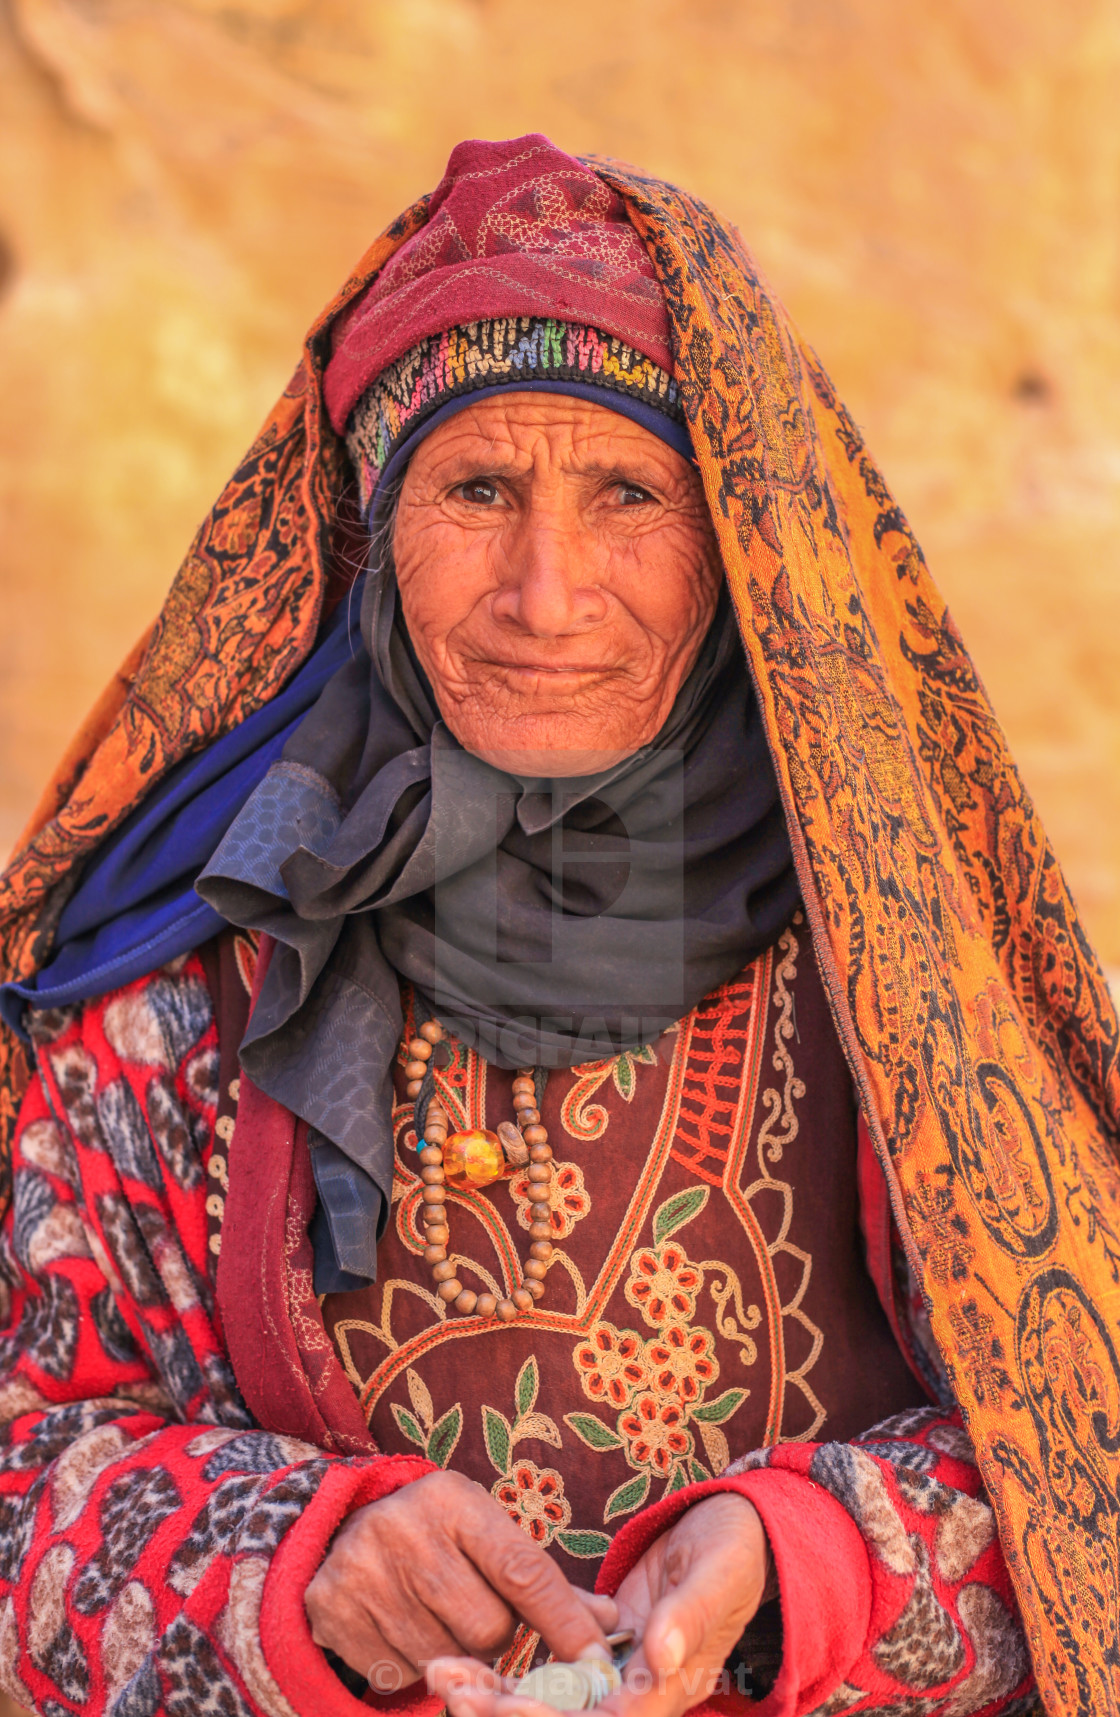 "Bedouin women in a traditional dress" stock image